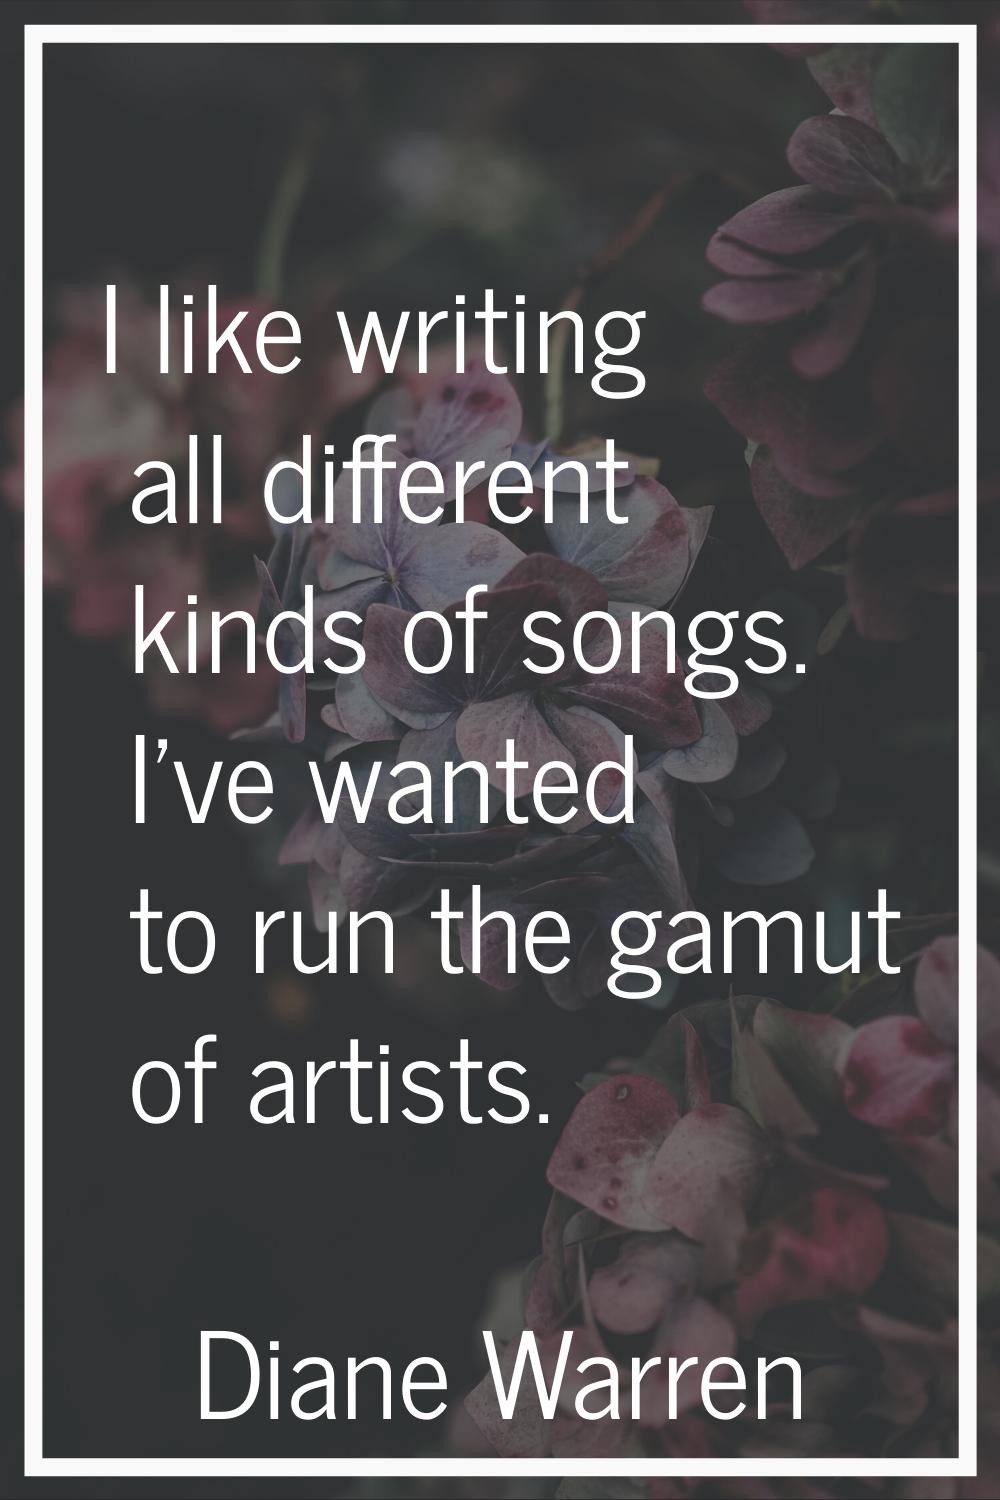 I like writing all different kinds of songs. I've wanted to run the gamut of artists.